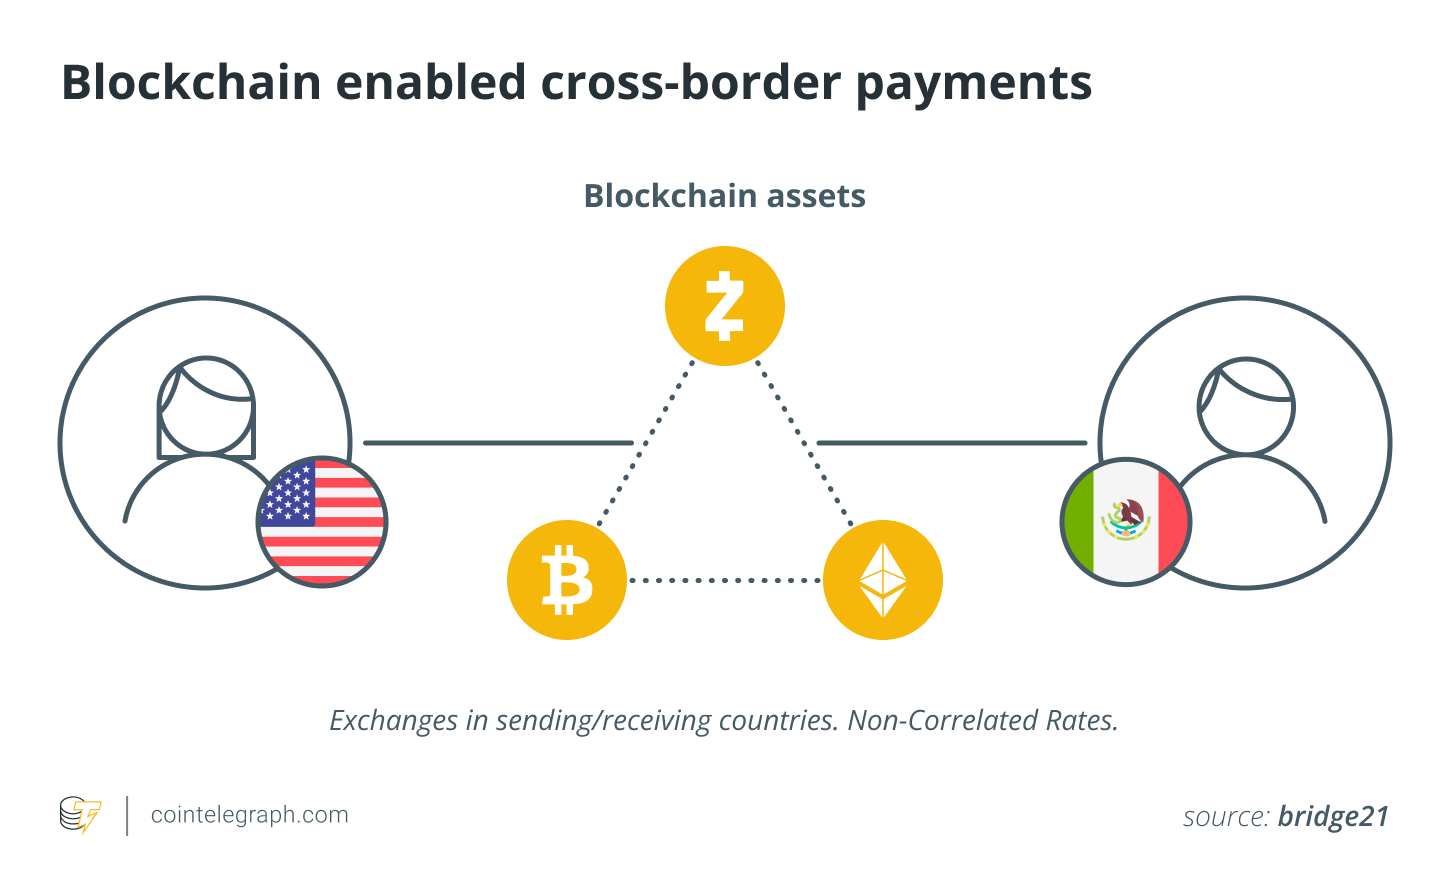 Blockchain enabled cross-border payments